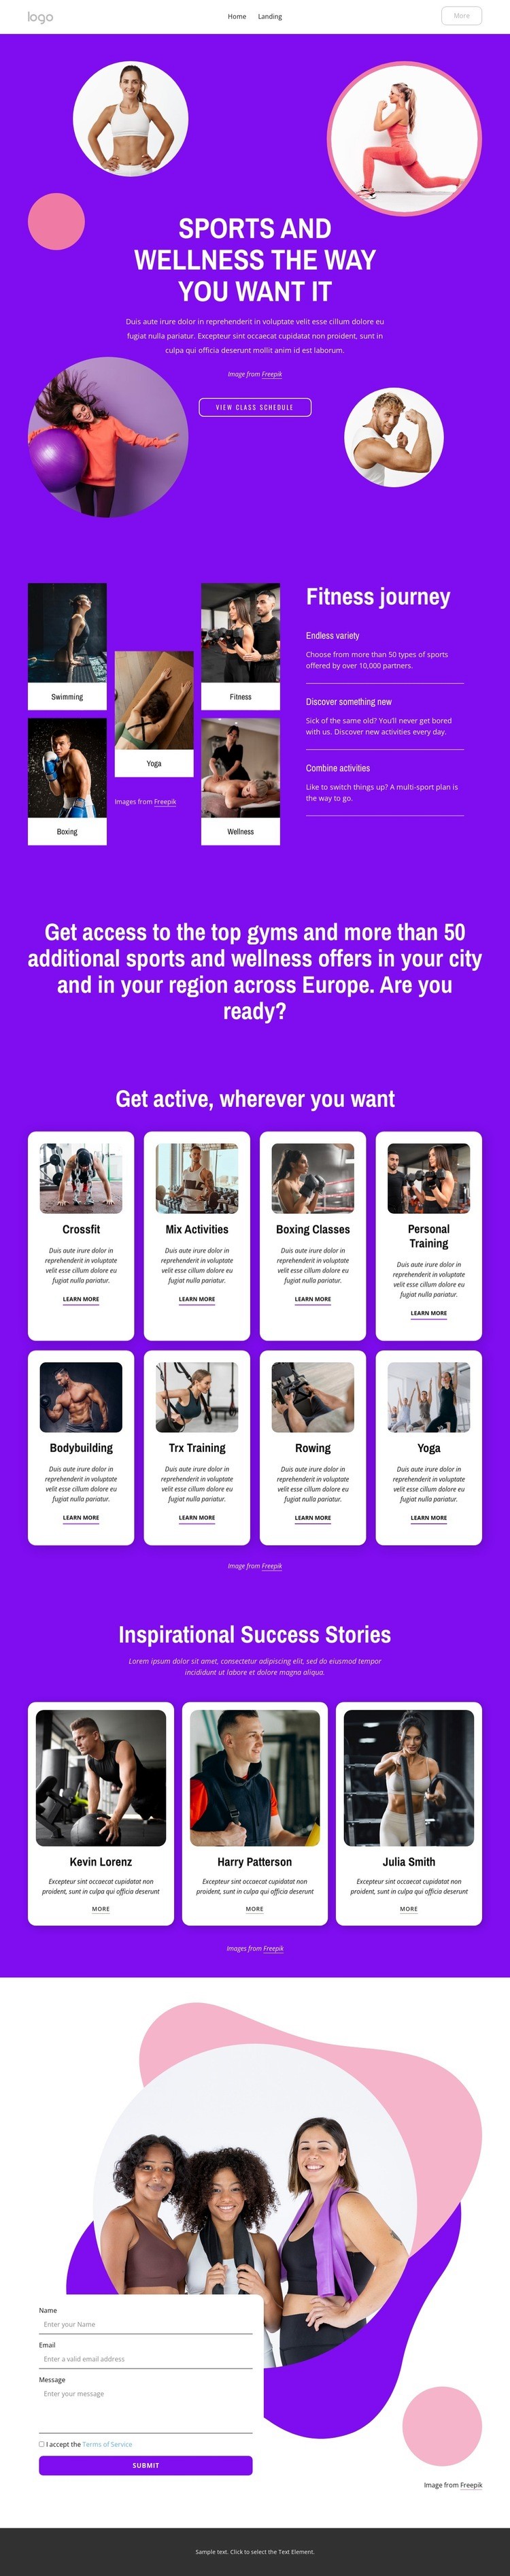 Sports and wellness the way you want it Wix Template Alternative